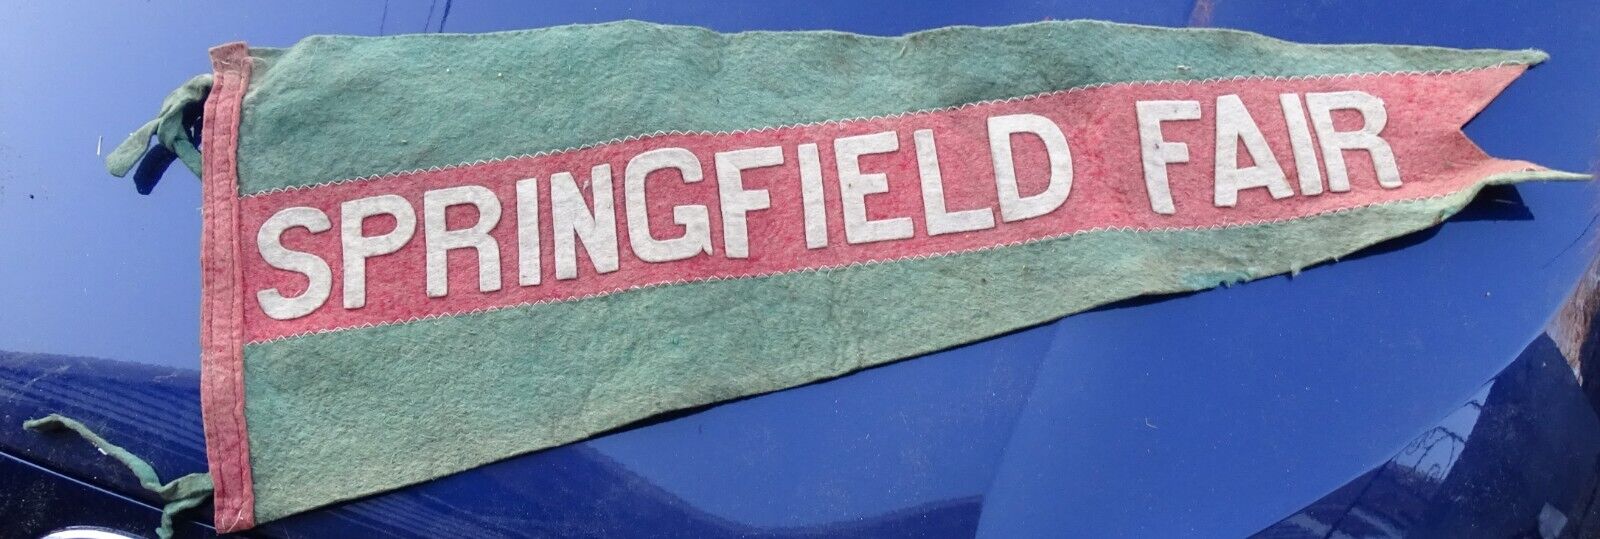 SPRINGFIELD FAIR circa 1915 Pennant (Most likely MAINE as it was found in VT.)